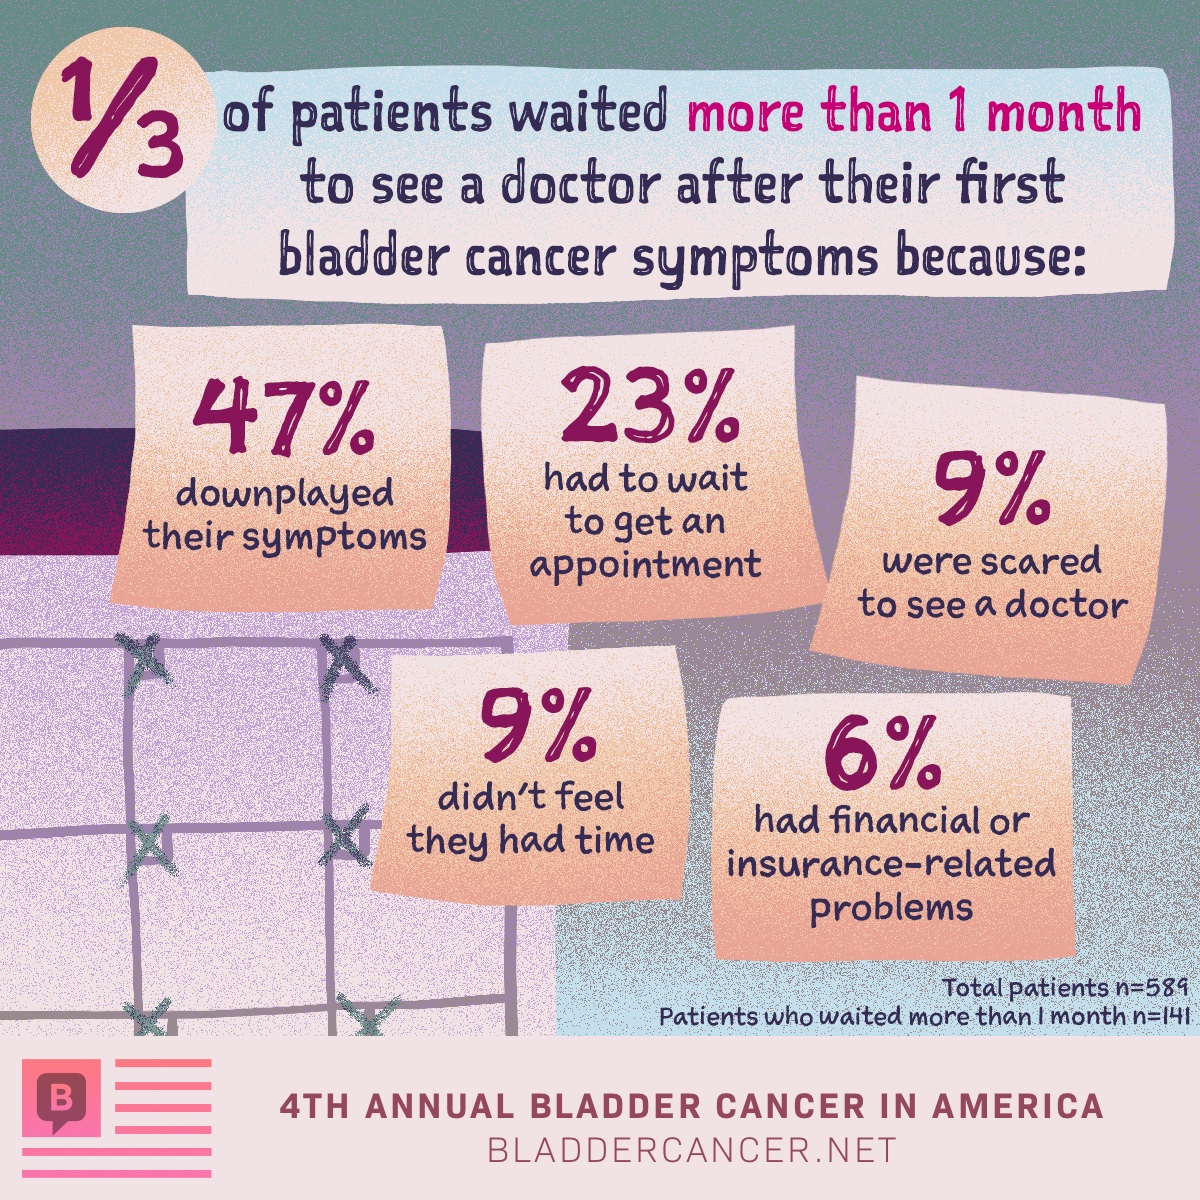 One third of patients waited more than one month to see a doctor after their first bladder cancer symptoms.